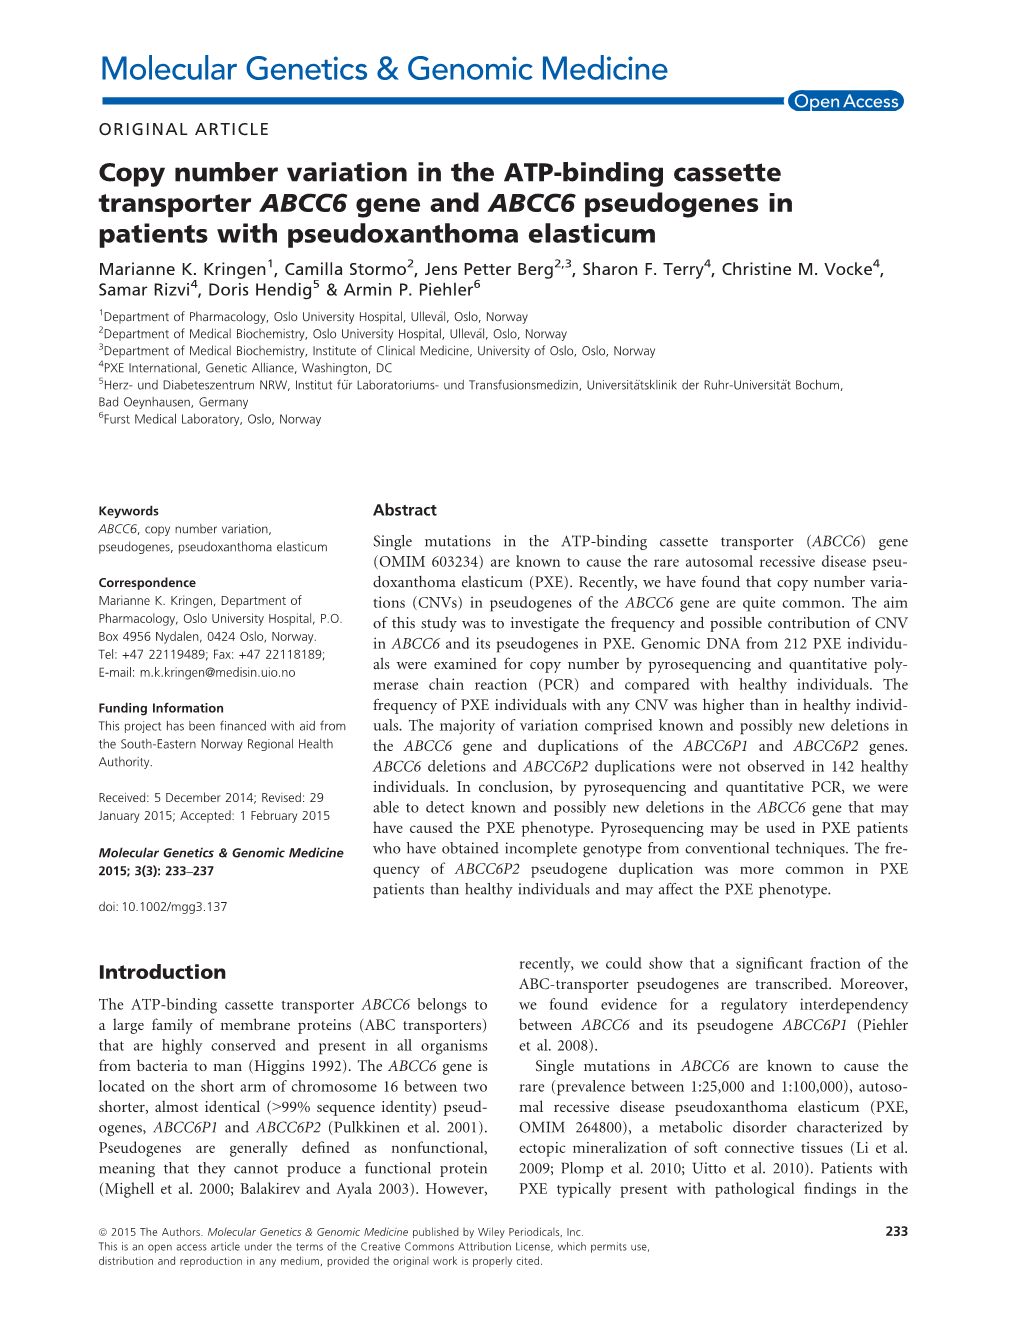 Binding Cassette Transporter ABCC6 Gene and ABCC6 Pseudogenes in Patients with Pseudoxanthoma Elasticum Marianne K